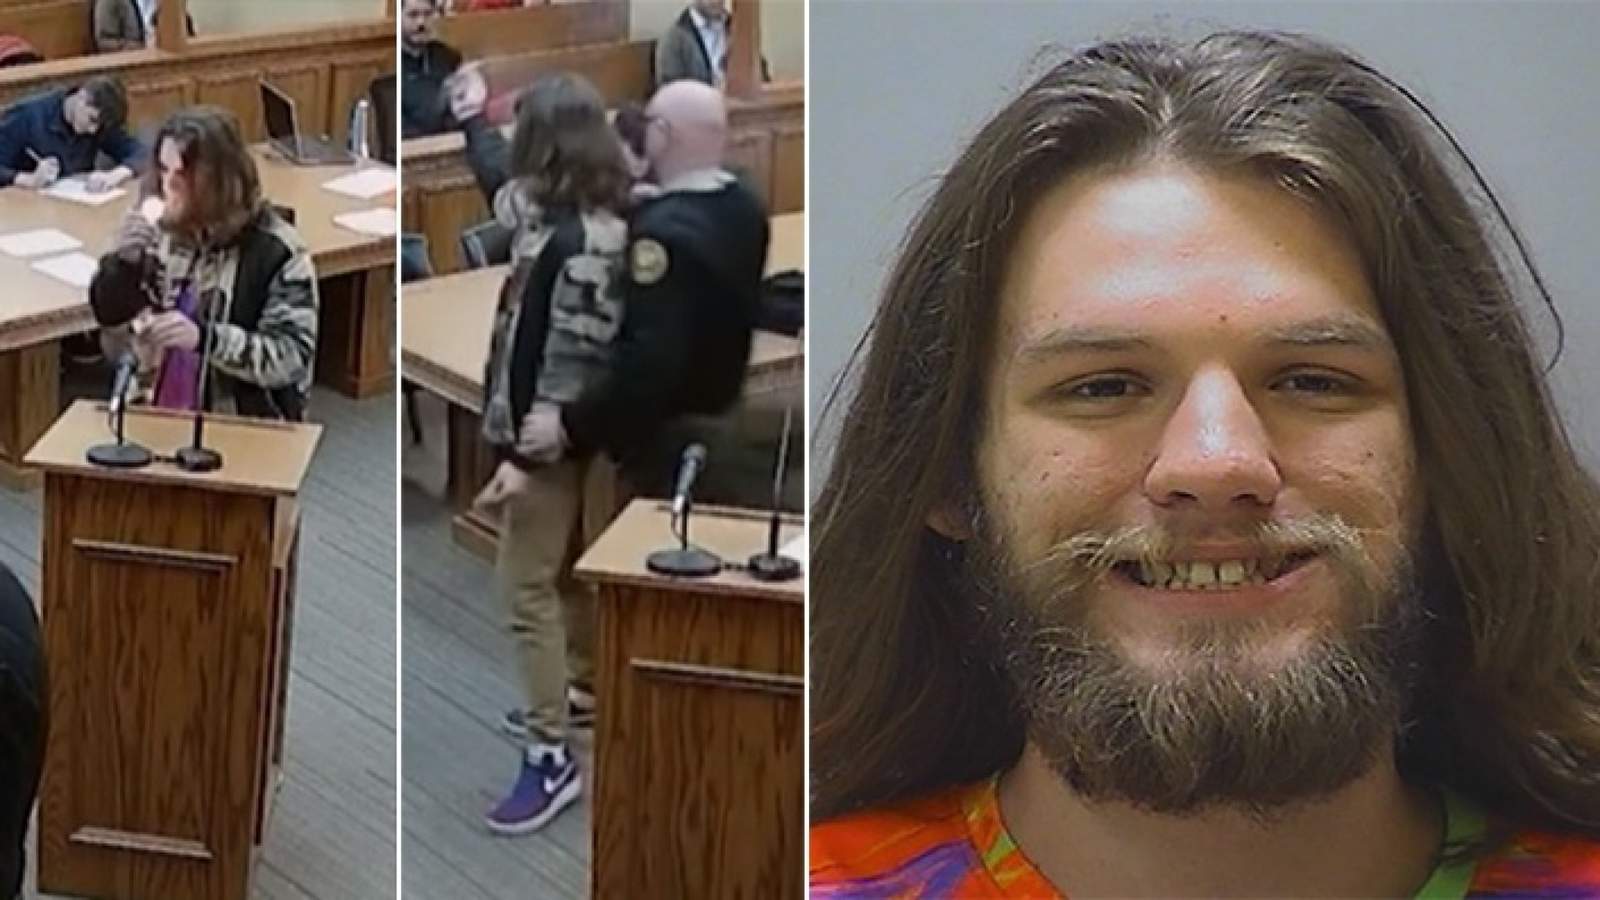 Marijuana suspect jailed for lighting up a joint in front of a judge